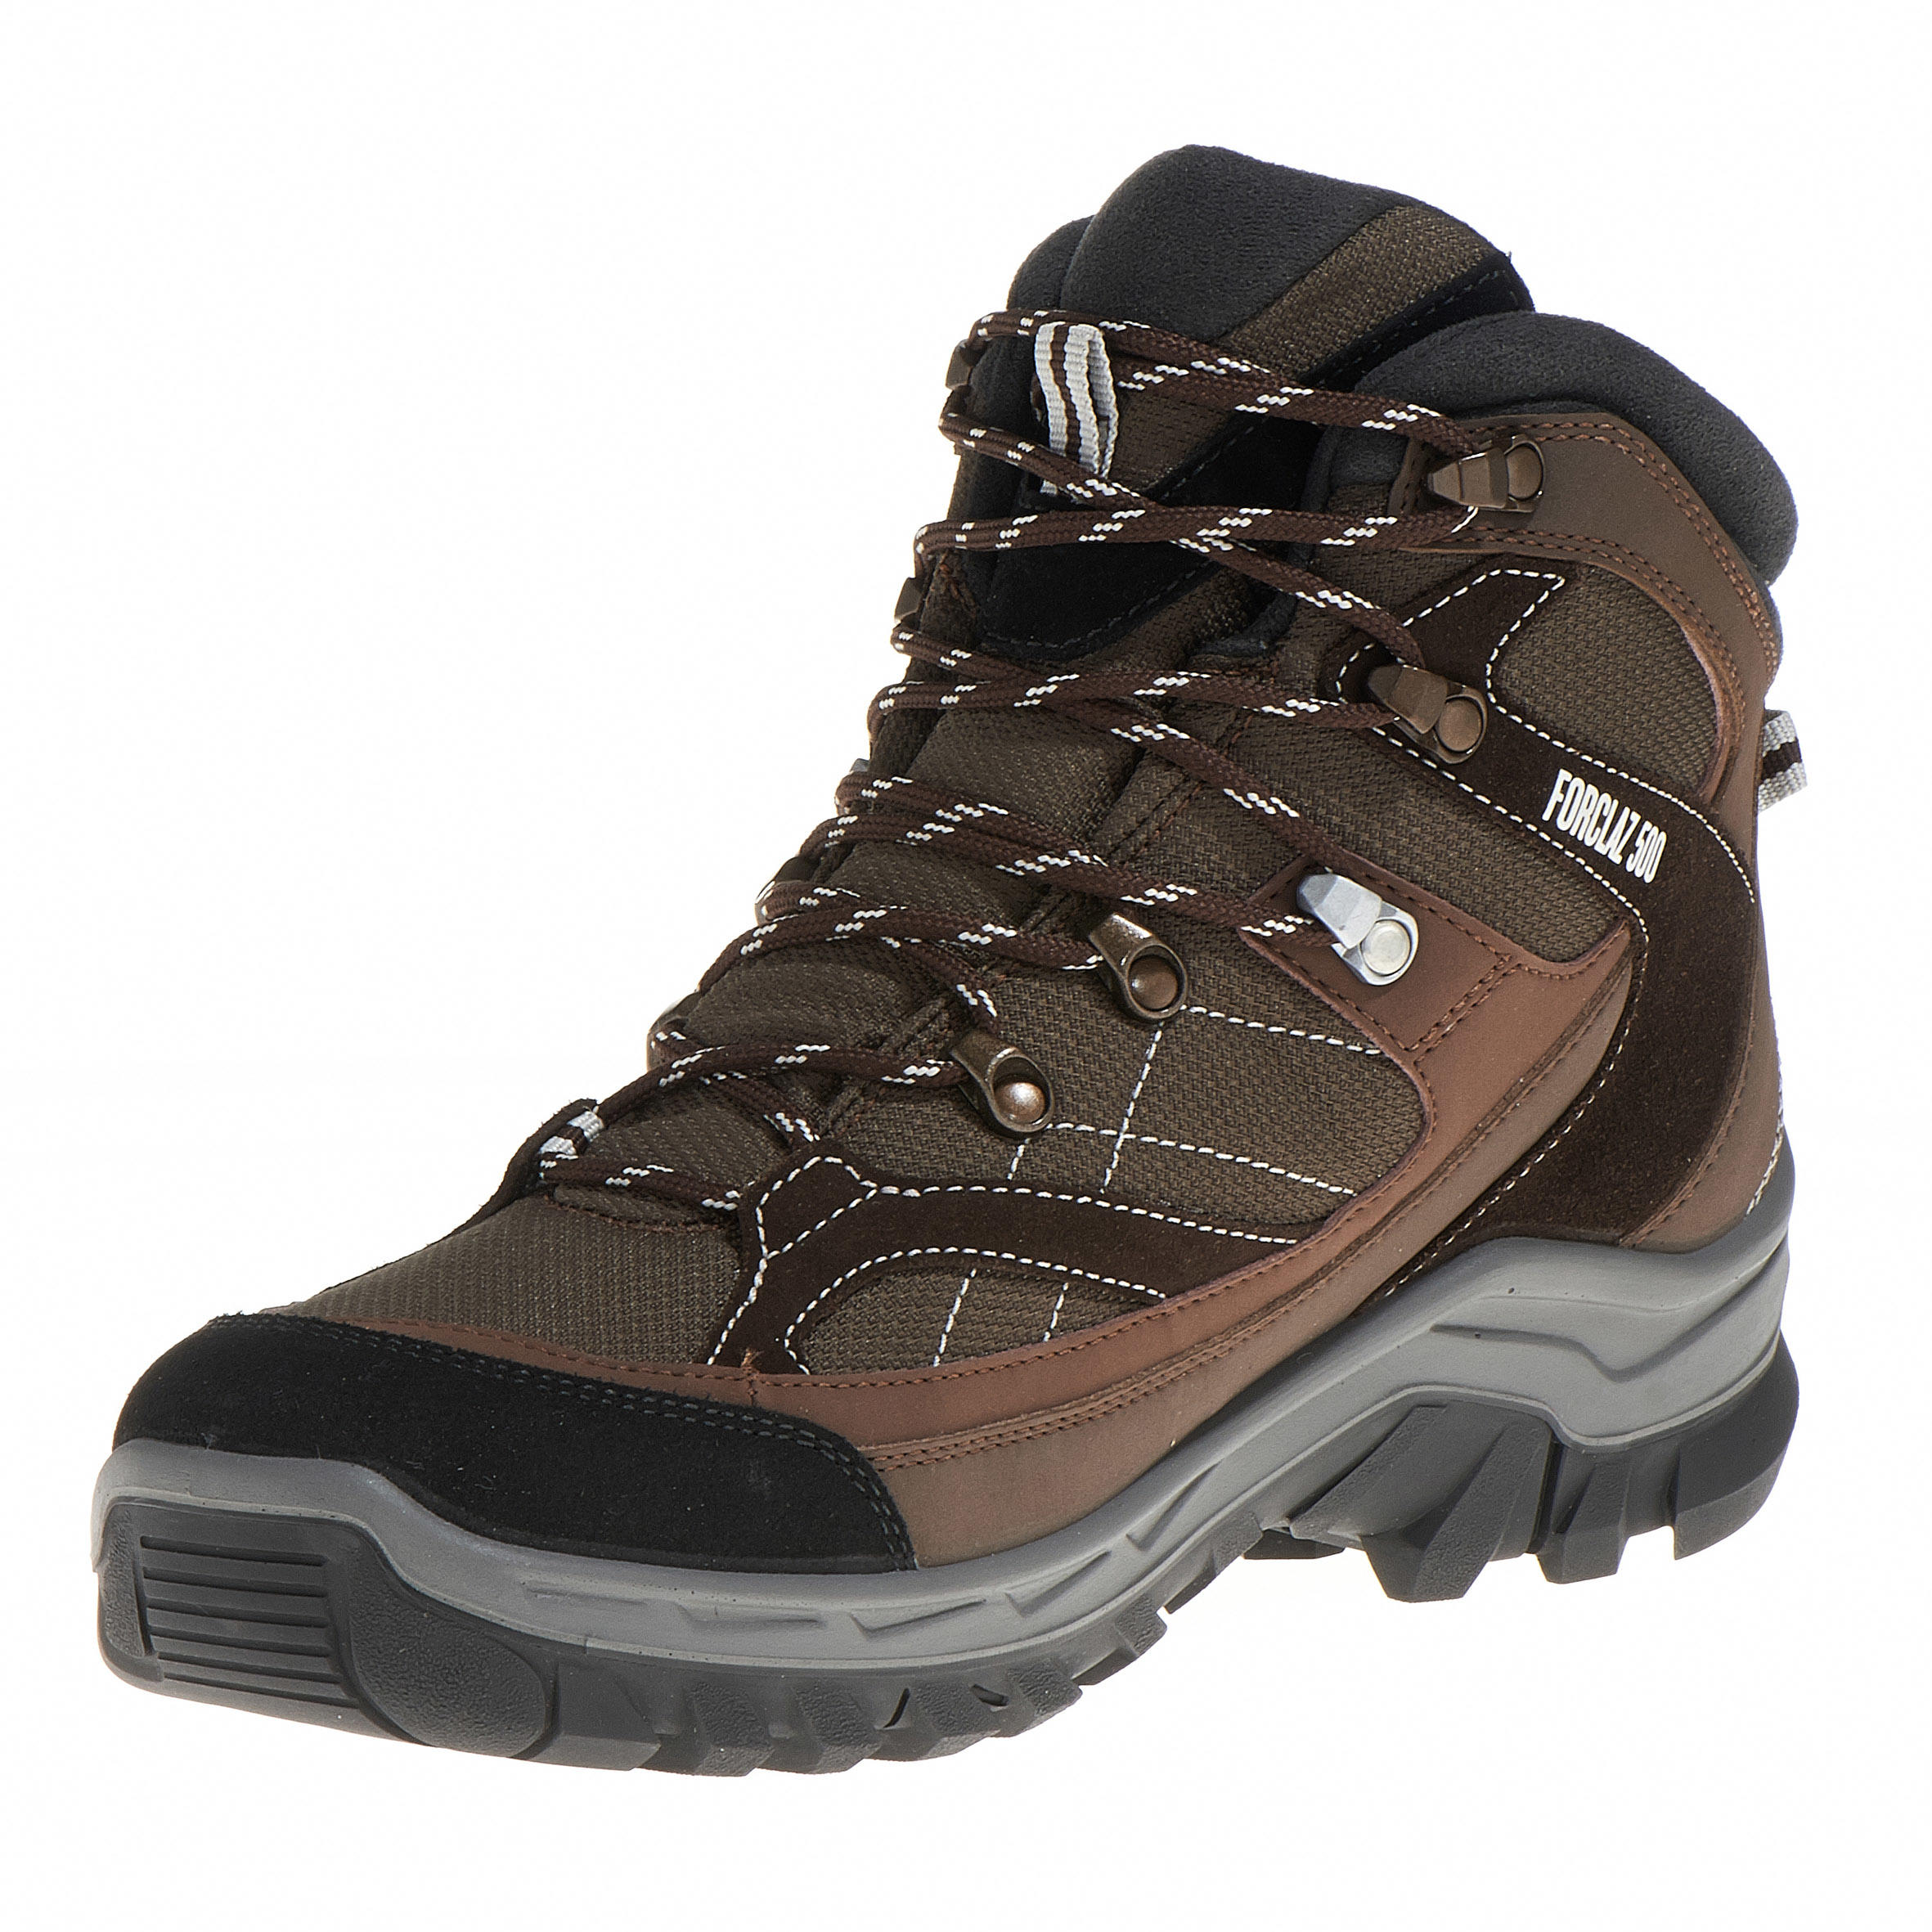 Forclaz 500 Warm: Pocket-friendly Hiking Shoes for all Weather Conditions